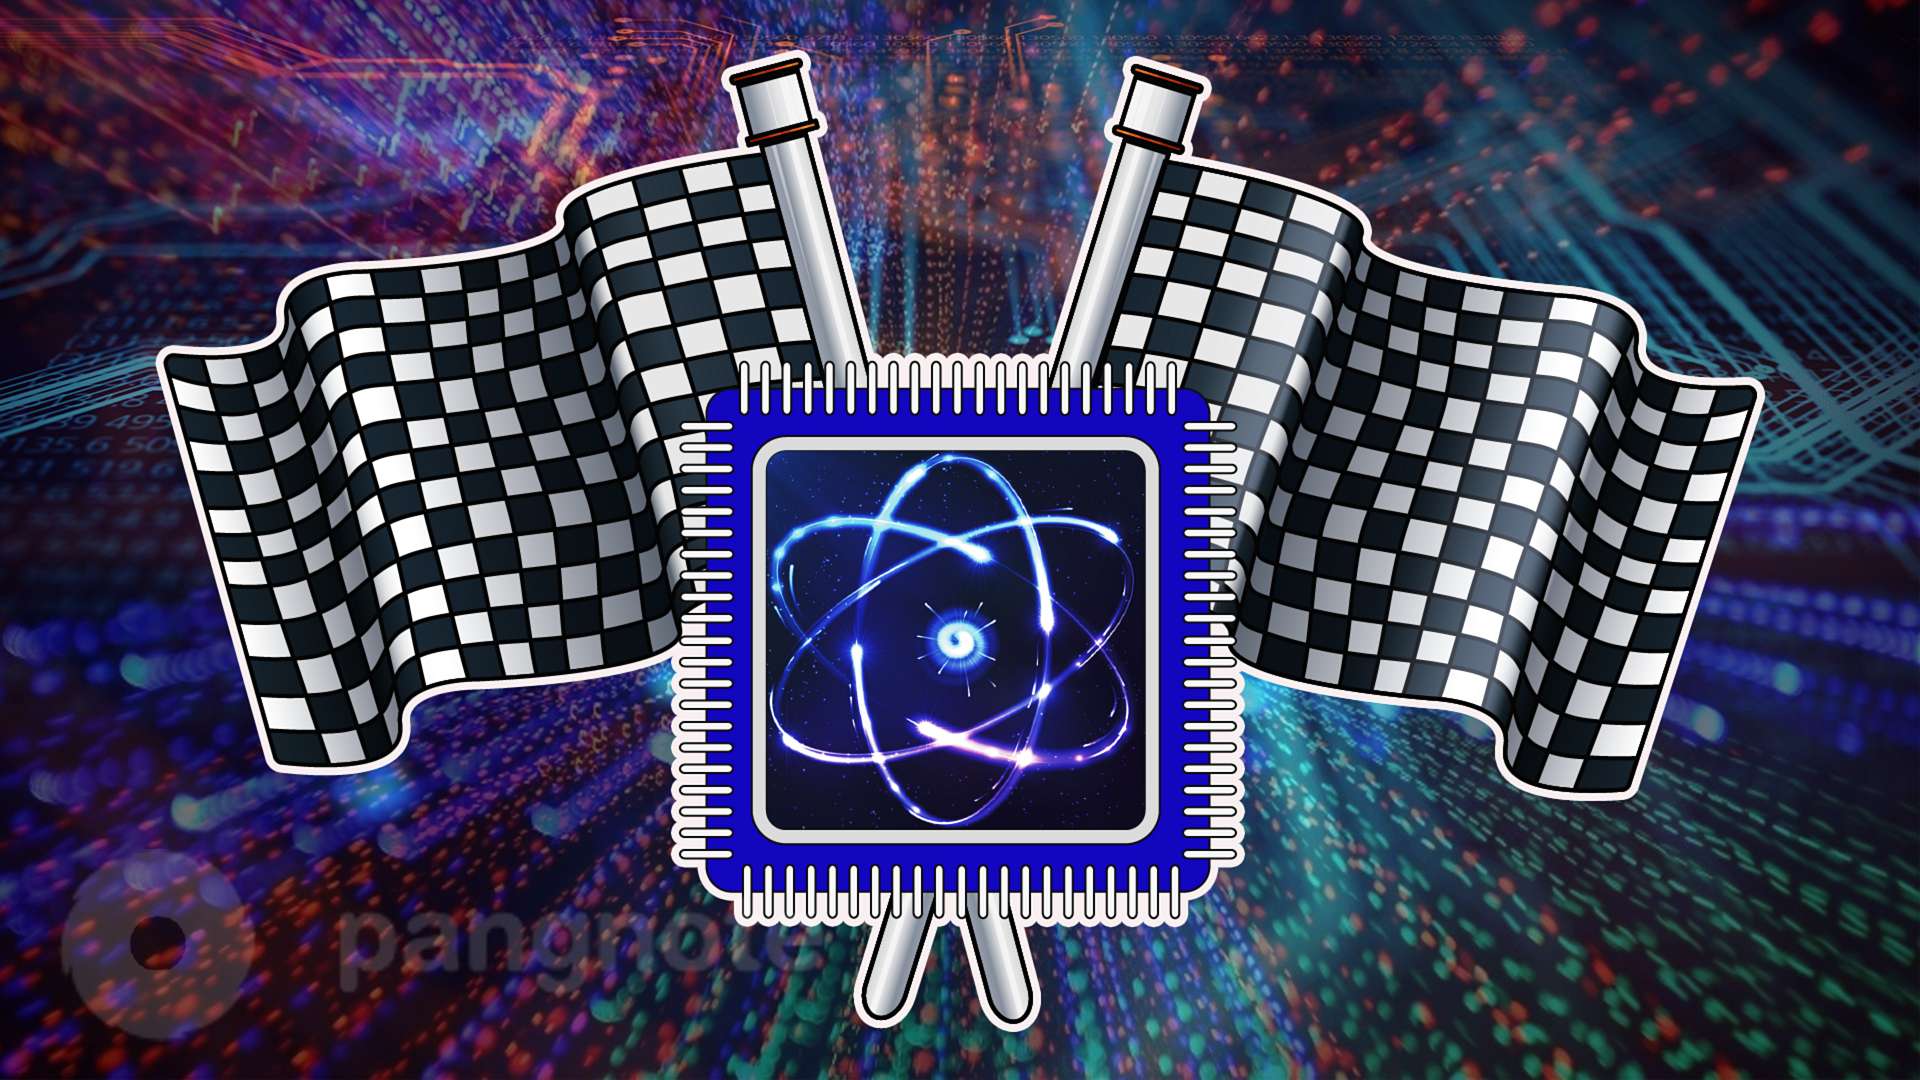 Quantum computer race is started